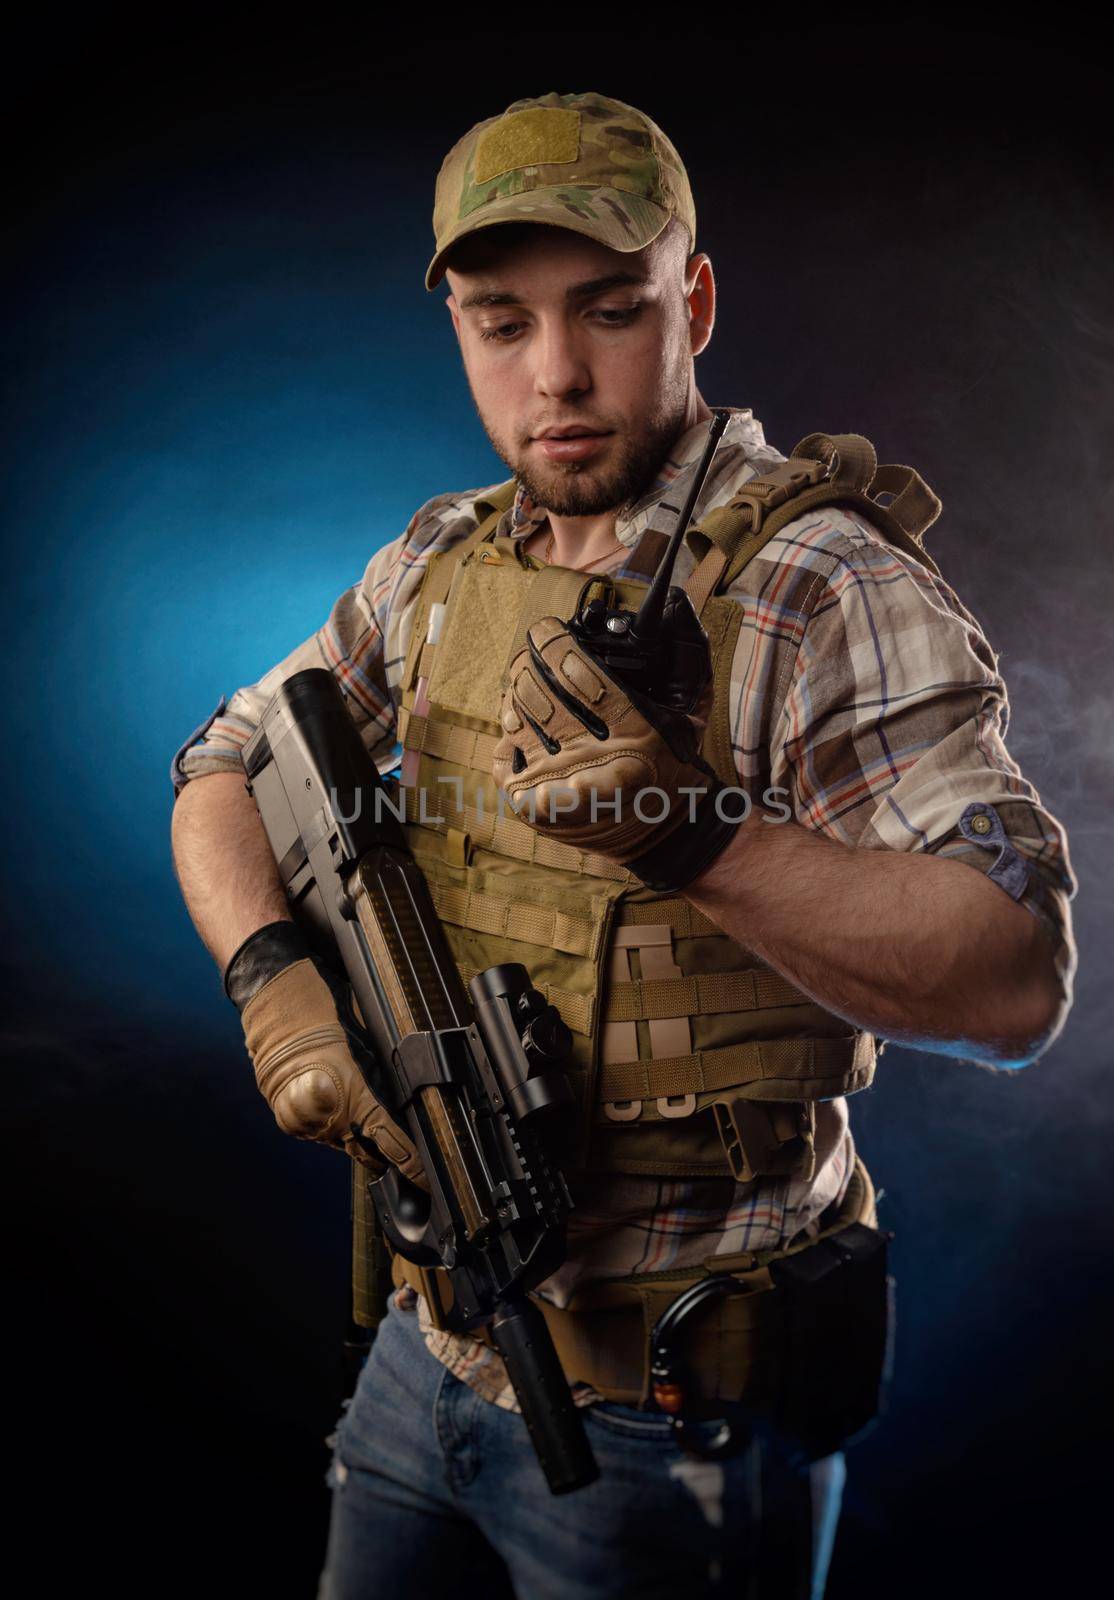 the guy's a military agent in a bulletproof vest with an automatic rifle